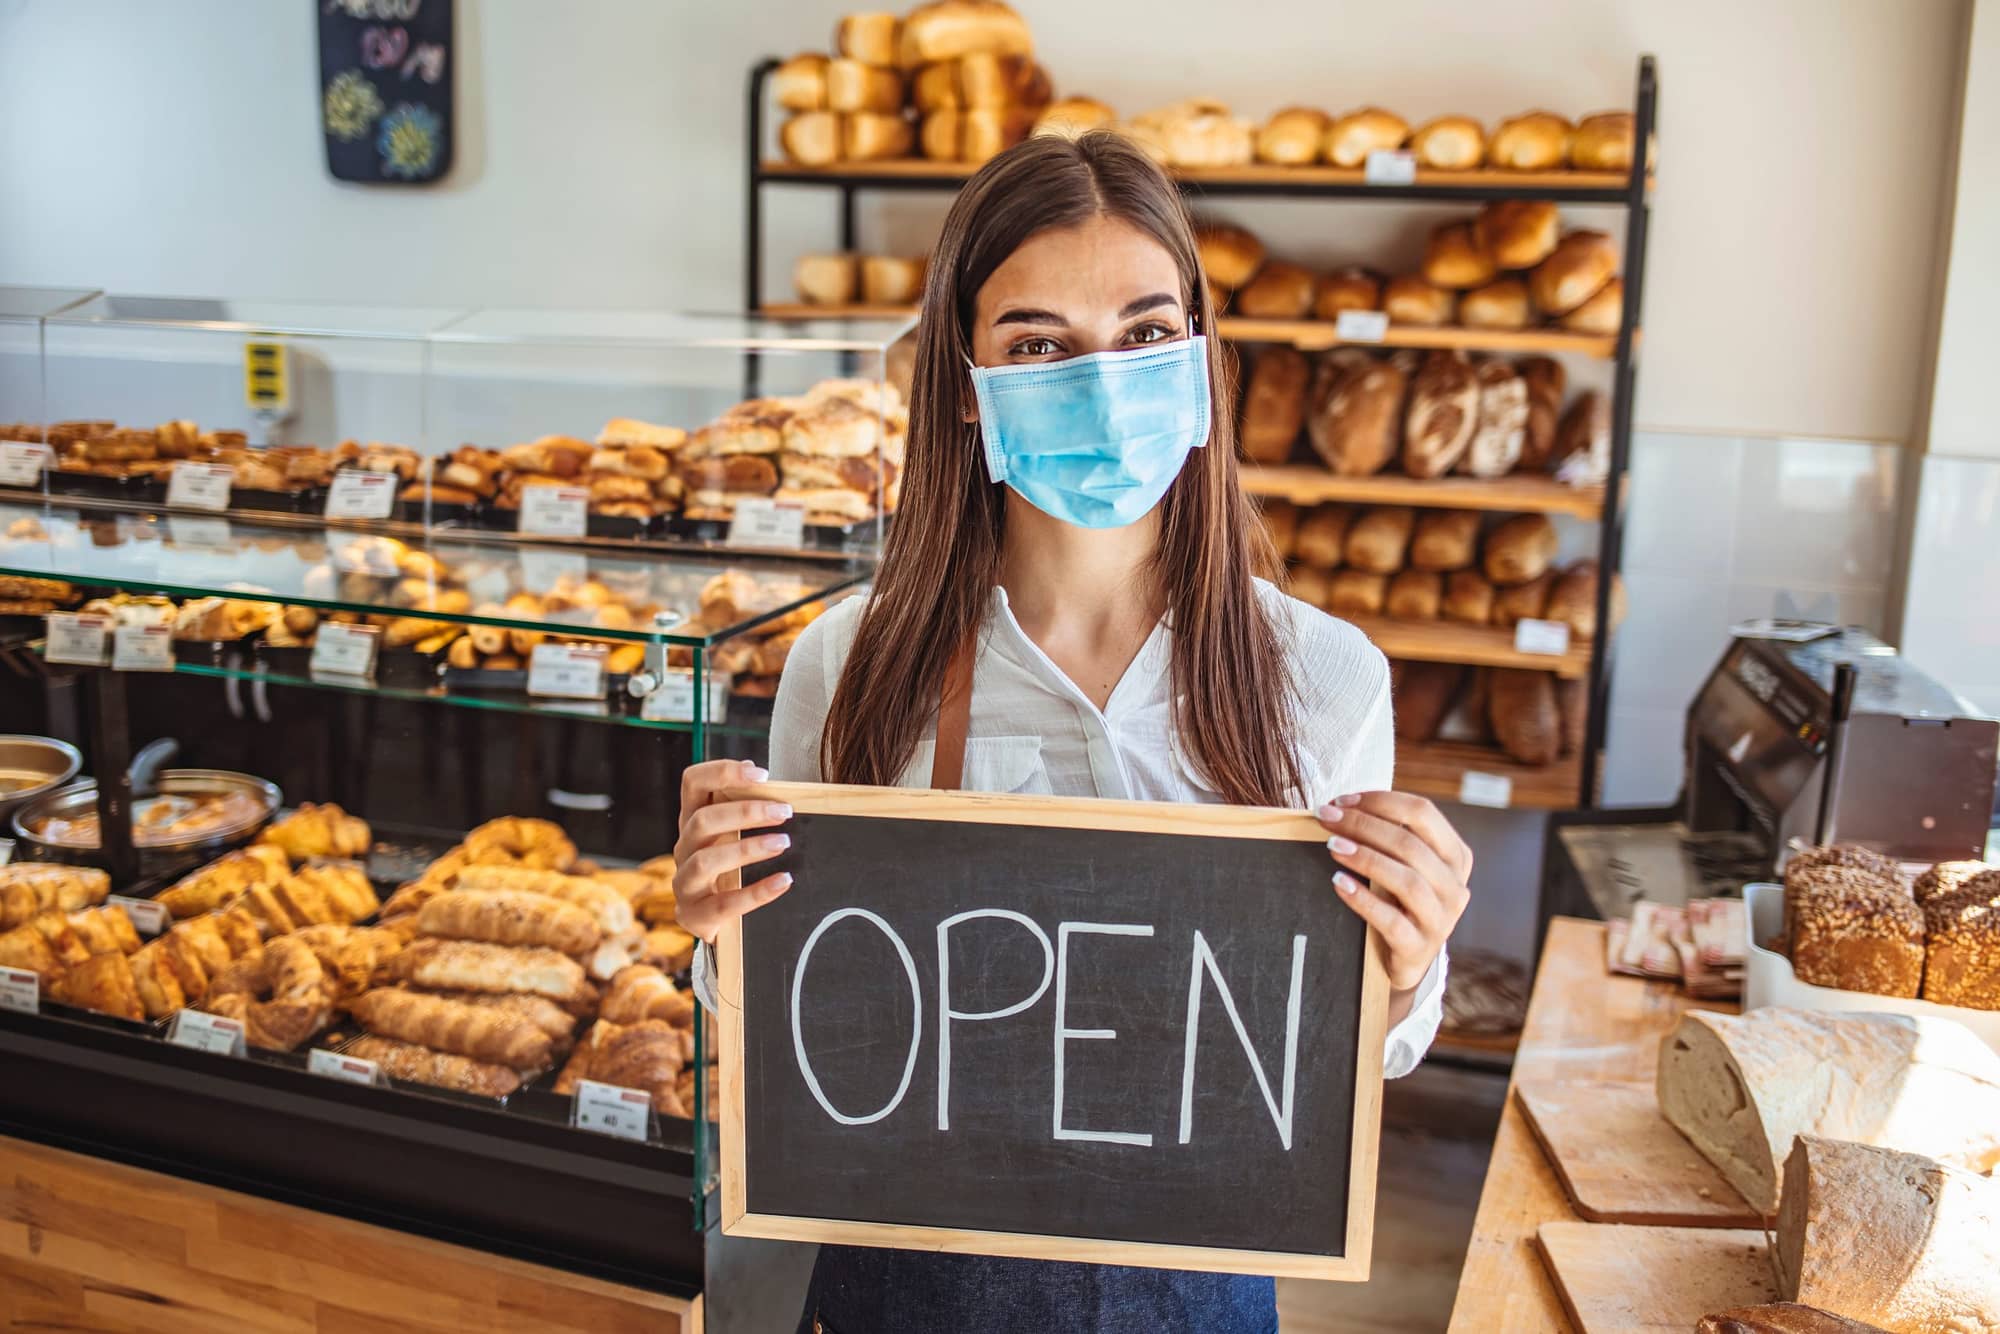 HOW THE COVID-19 PANDEMIC CHANGED SMALL BUSINESS MARKETING